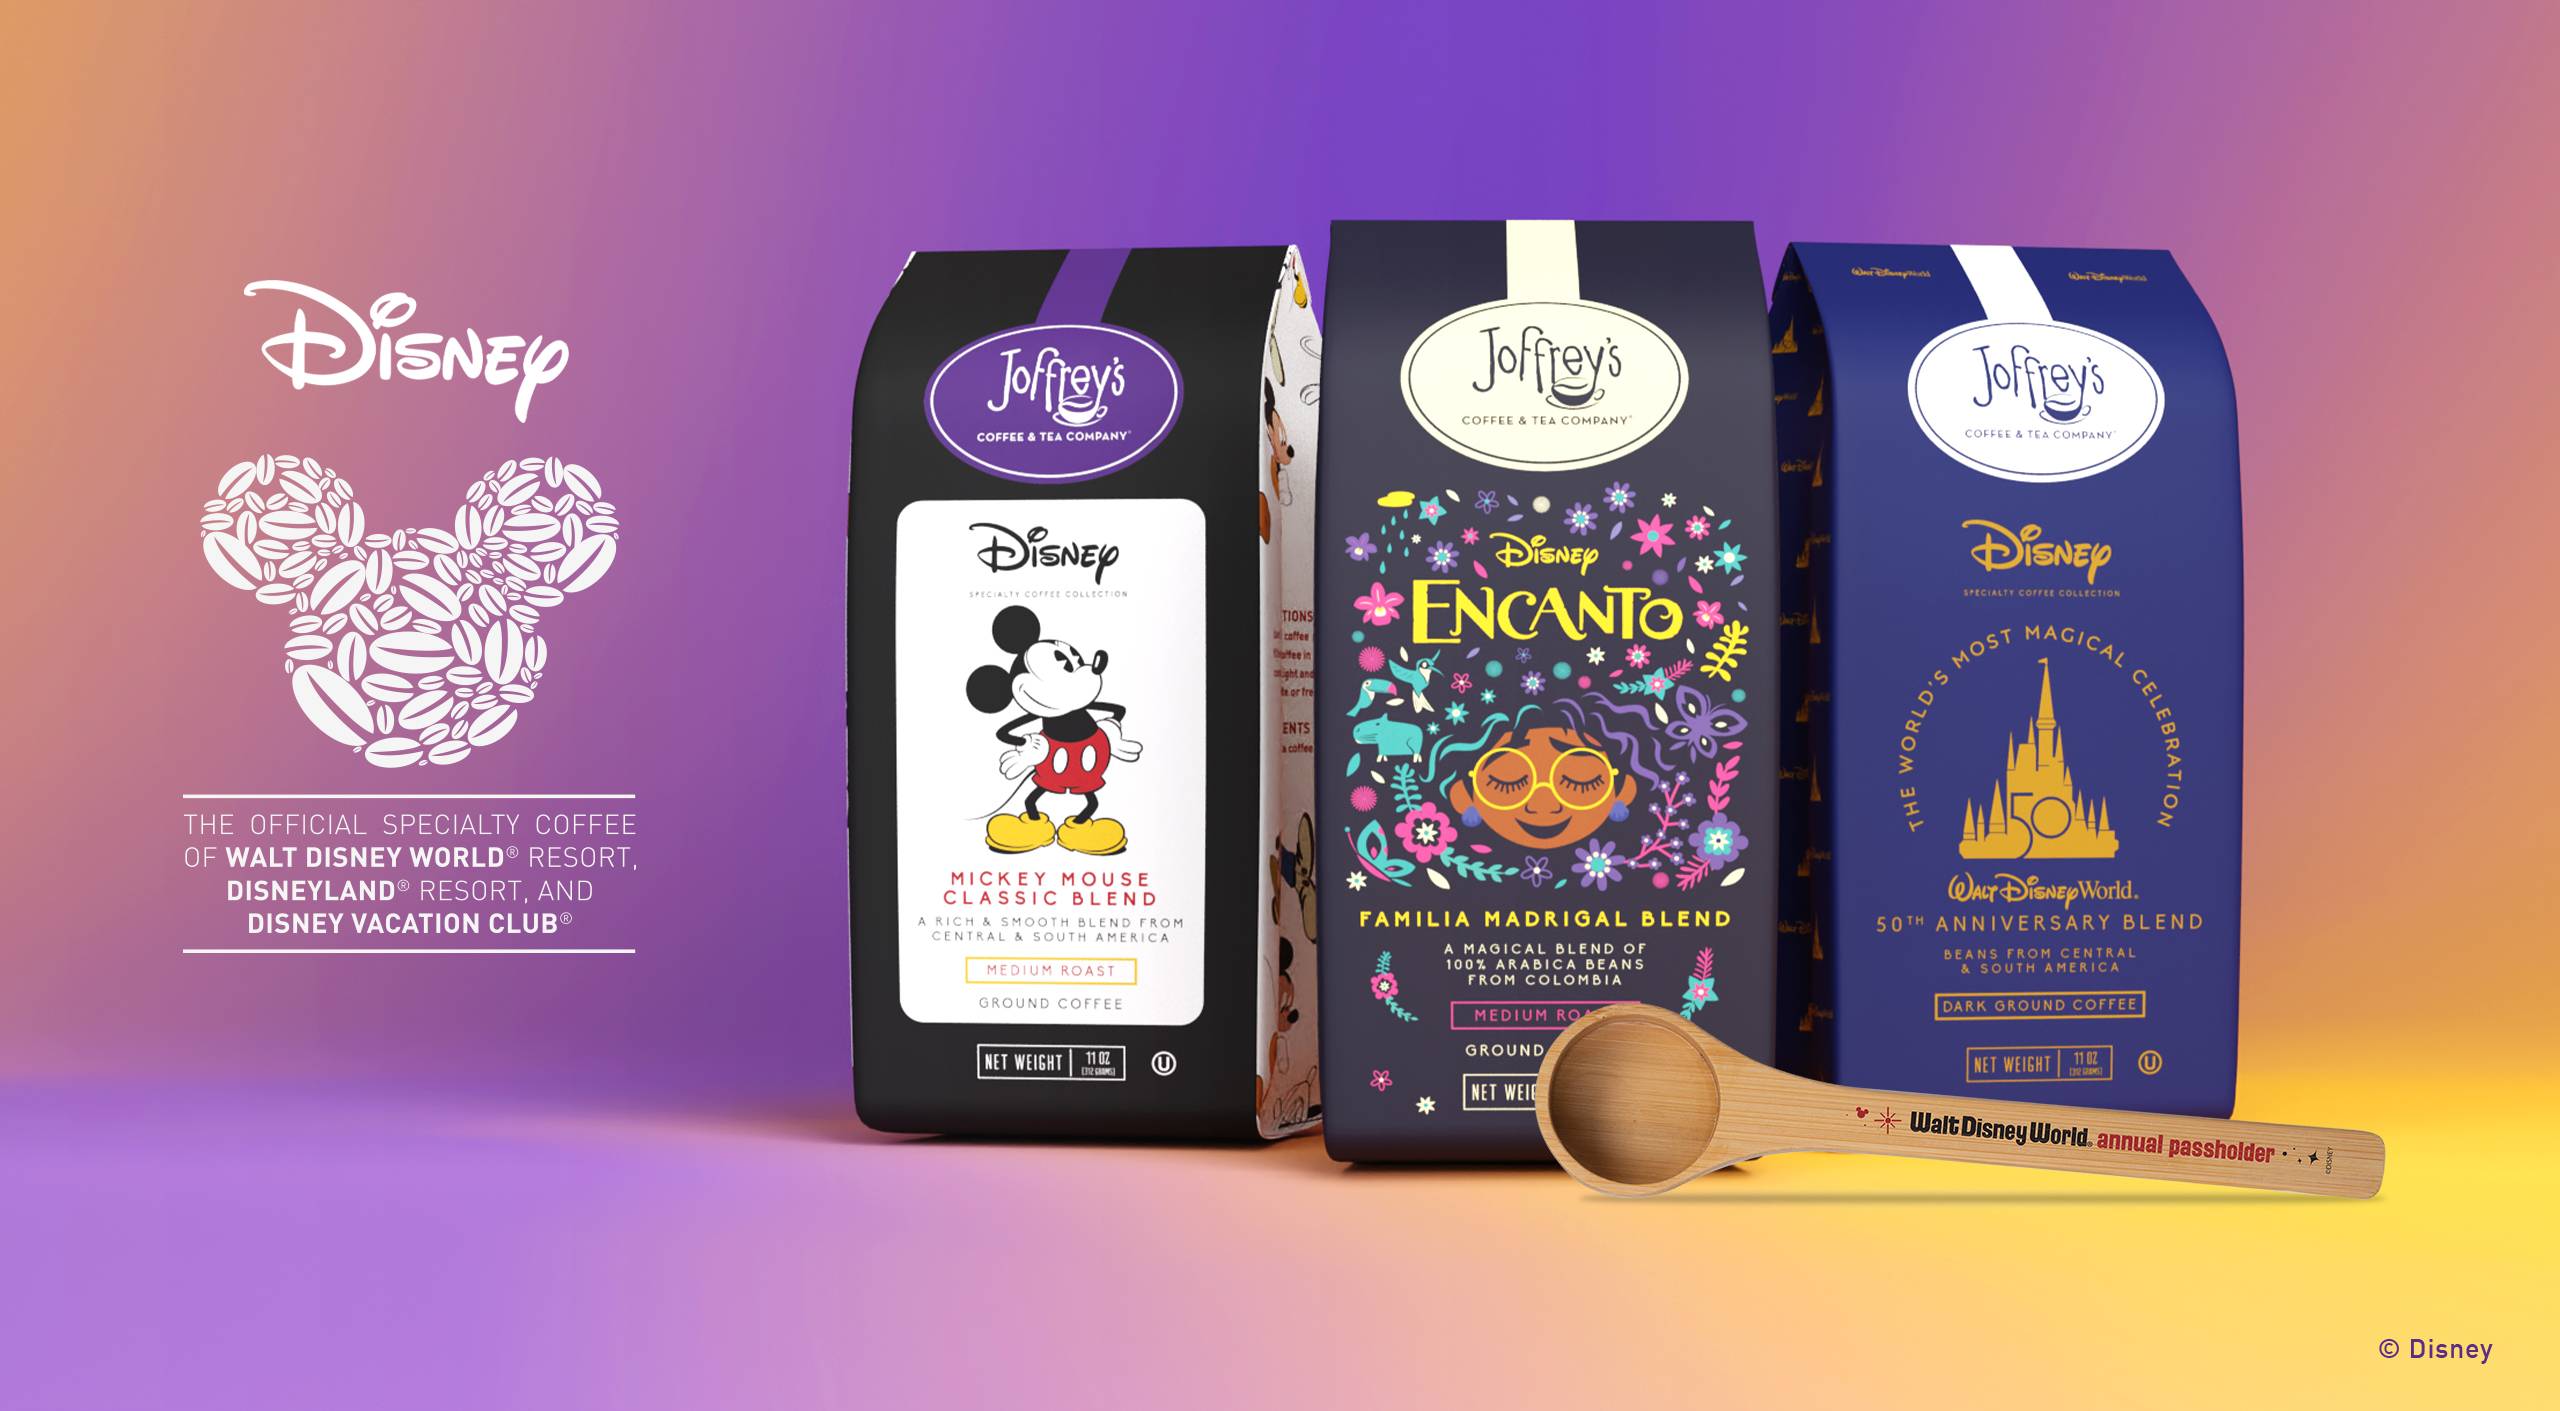 Walt Disney World Annual Passholders can get a free Joffrey's Coffee Scoop with purchase